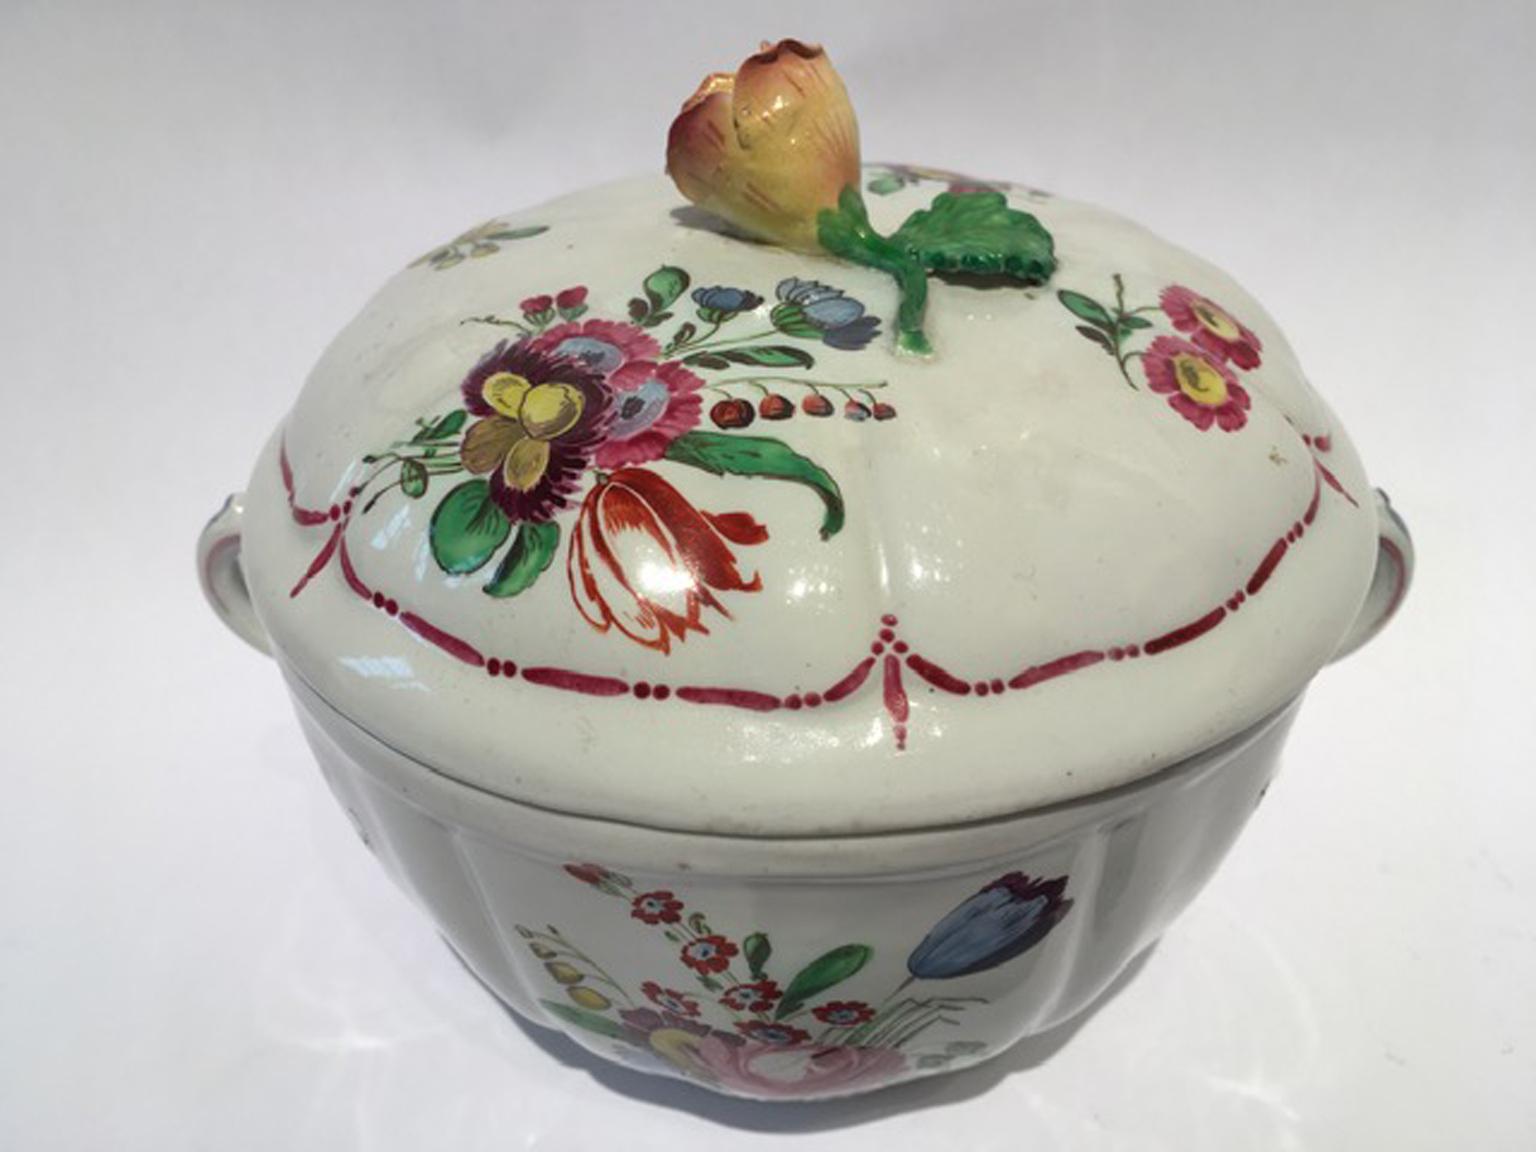 Italian Italy 18th Century Richard Ginori Porcelain Covered Cup or Sugar Bowl For Sale